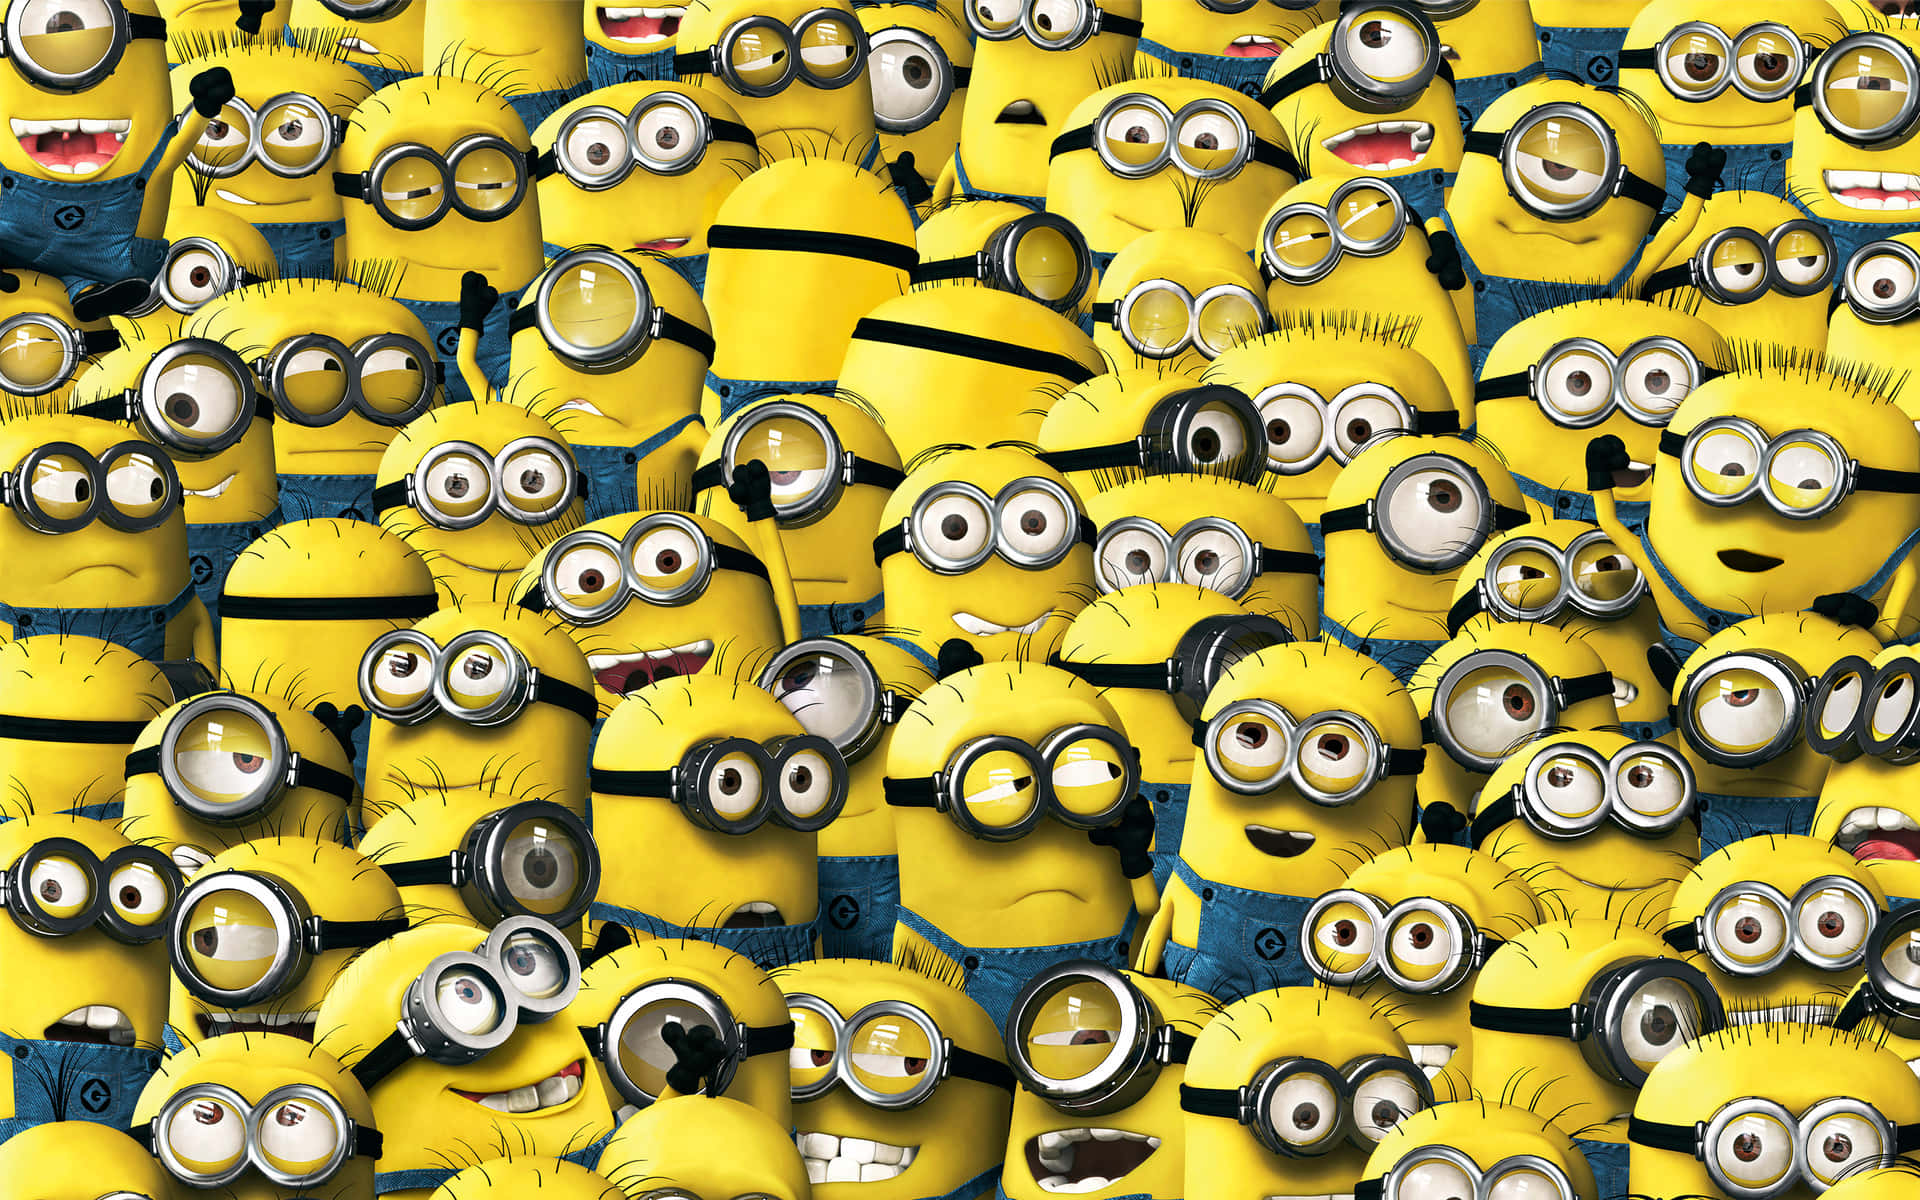 Put on a happy face, Minions style!